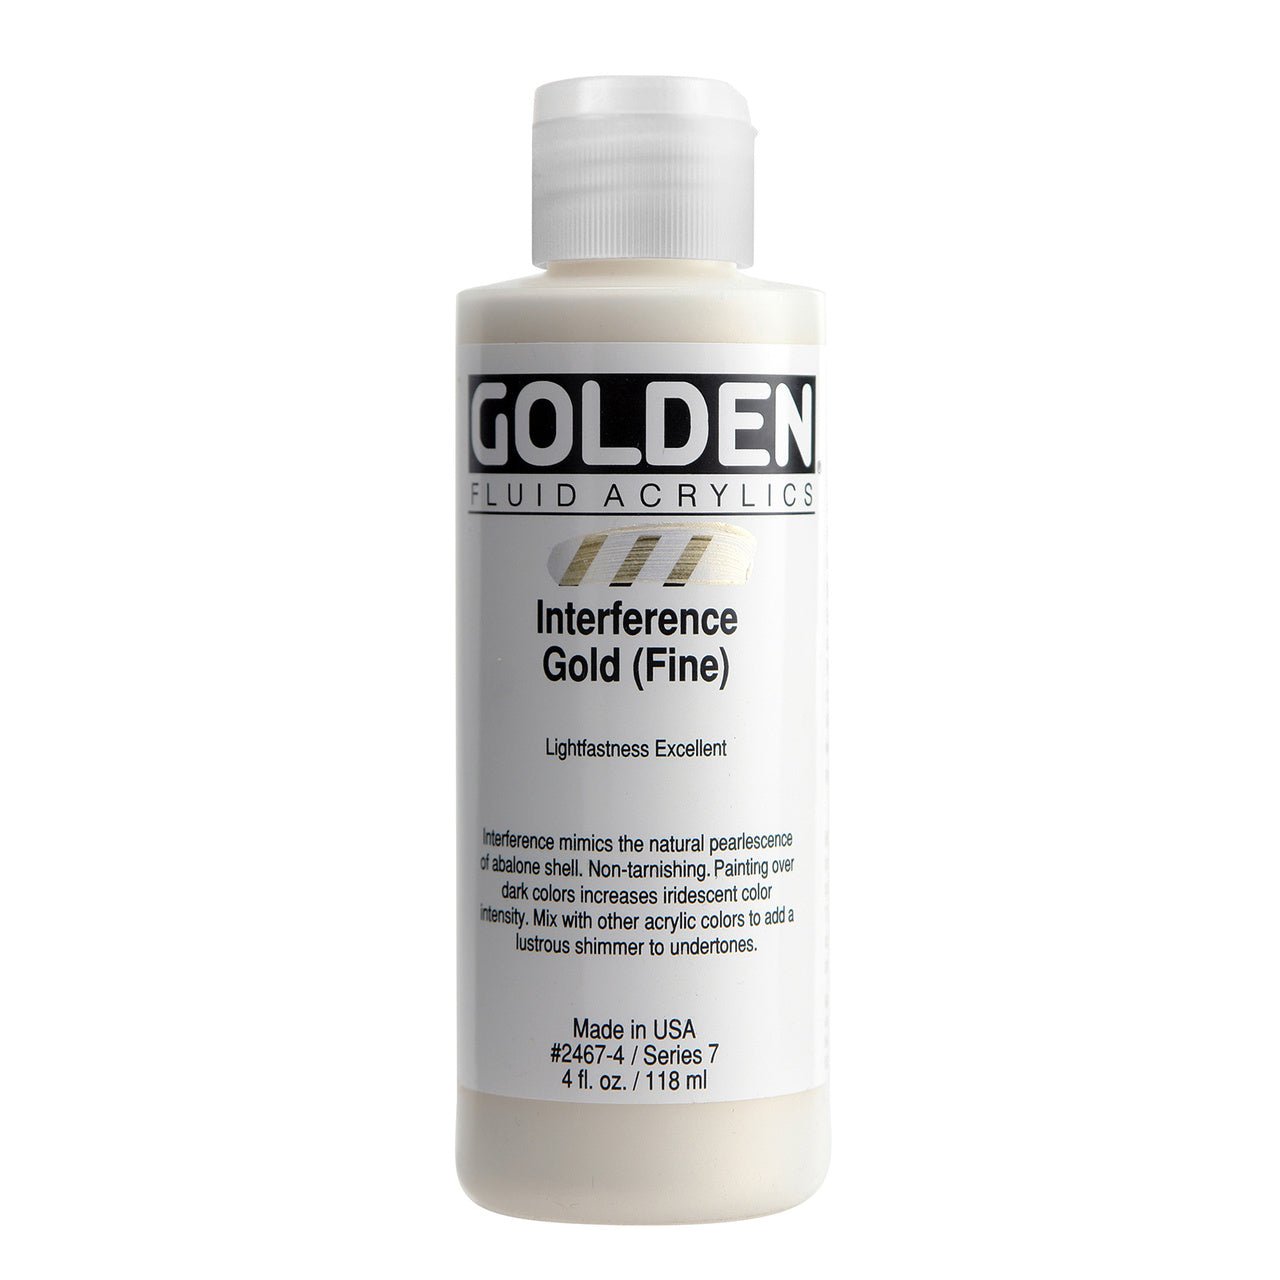 Golden Fluid Acrylic Interference Gold (fine) 4 oz - merriartist.com